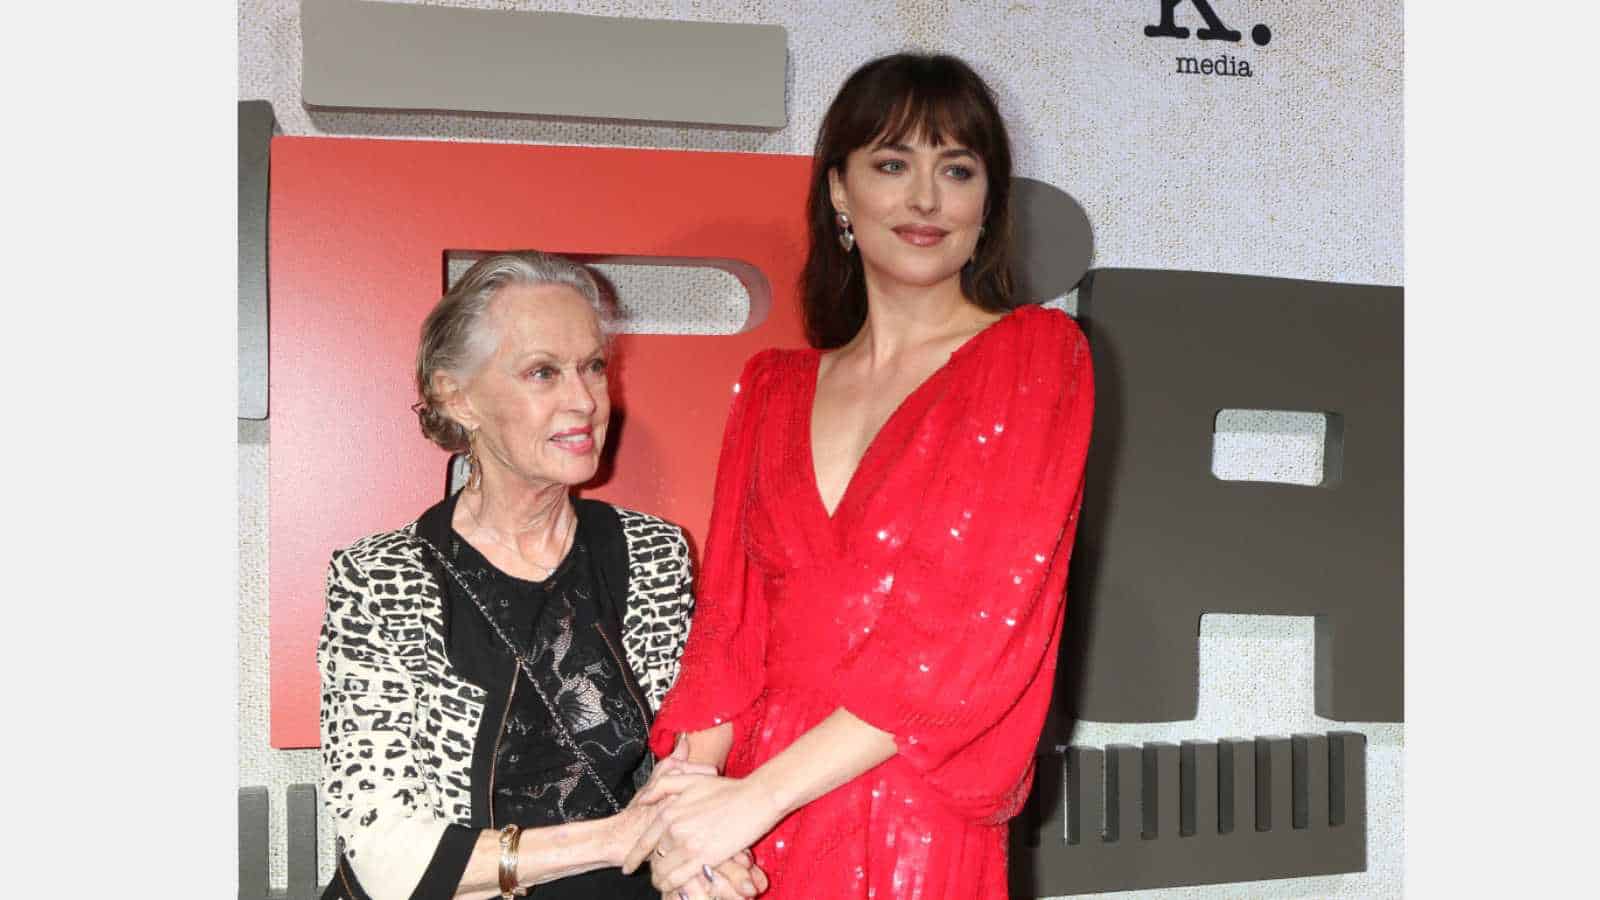 LOS ANGELES - OCT 24: Tippi Hedren, Dakota Johnson at the "Suspiria" Premiere at the ArcLight Theaters on October 24, 2018 in Los Angeles, CA
